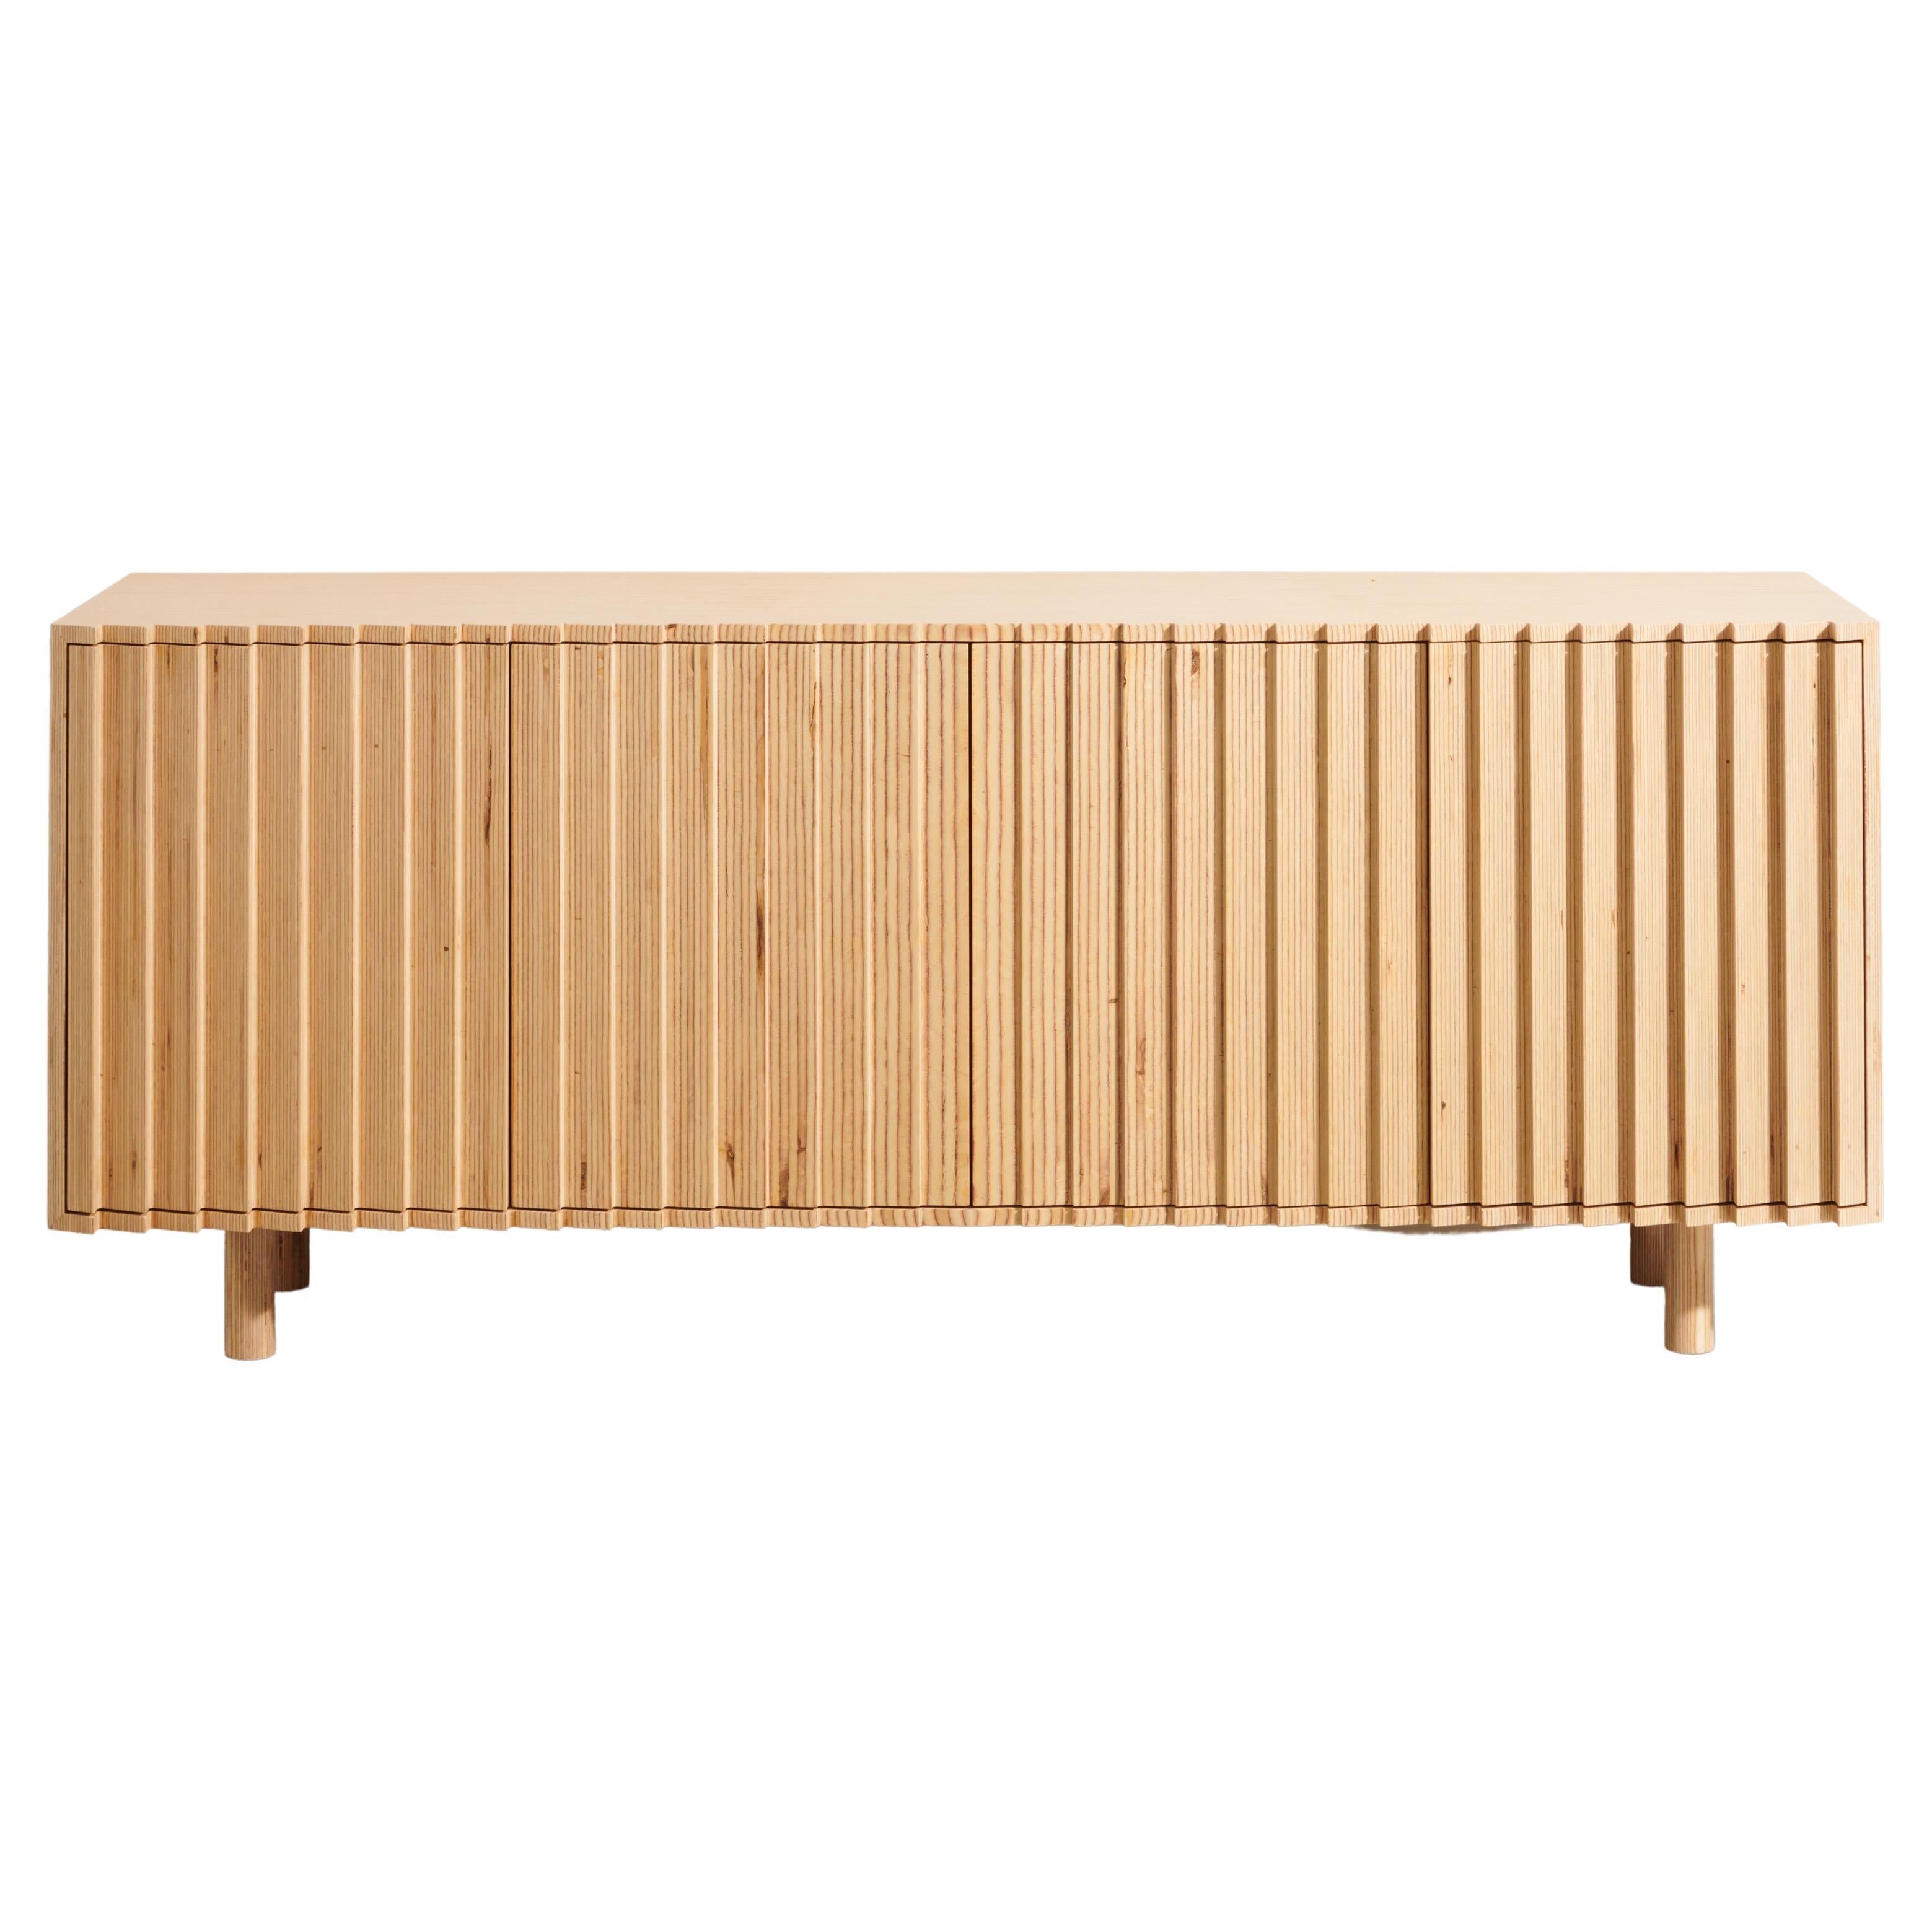 Stack Fresnel Credenza by Timbur, Represented by Tuleste Factory For Sale